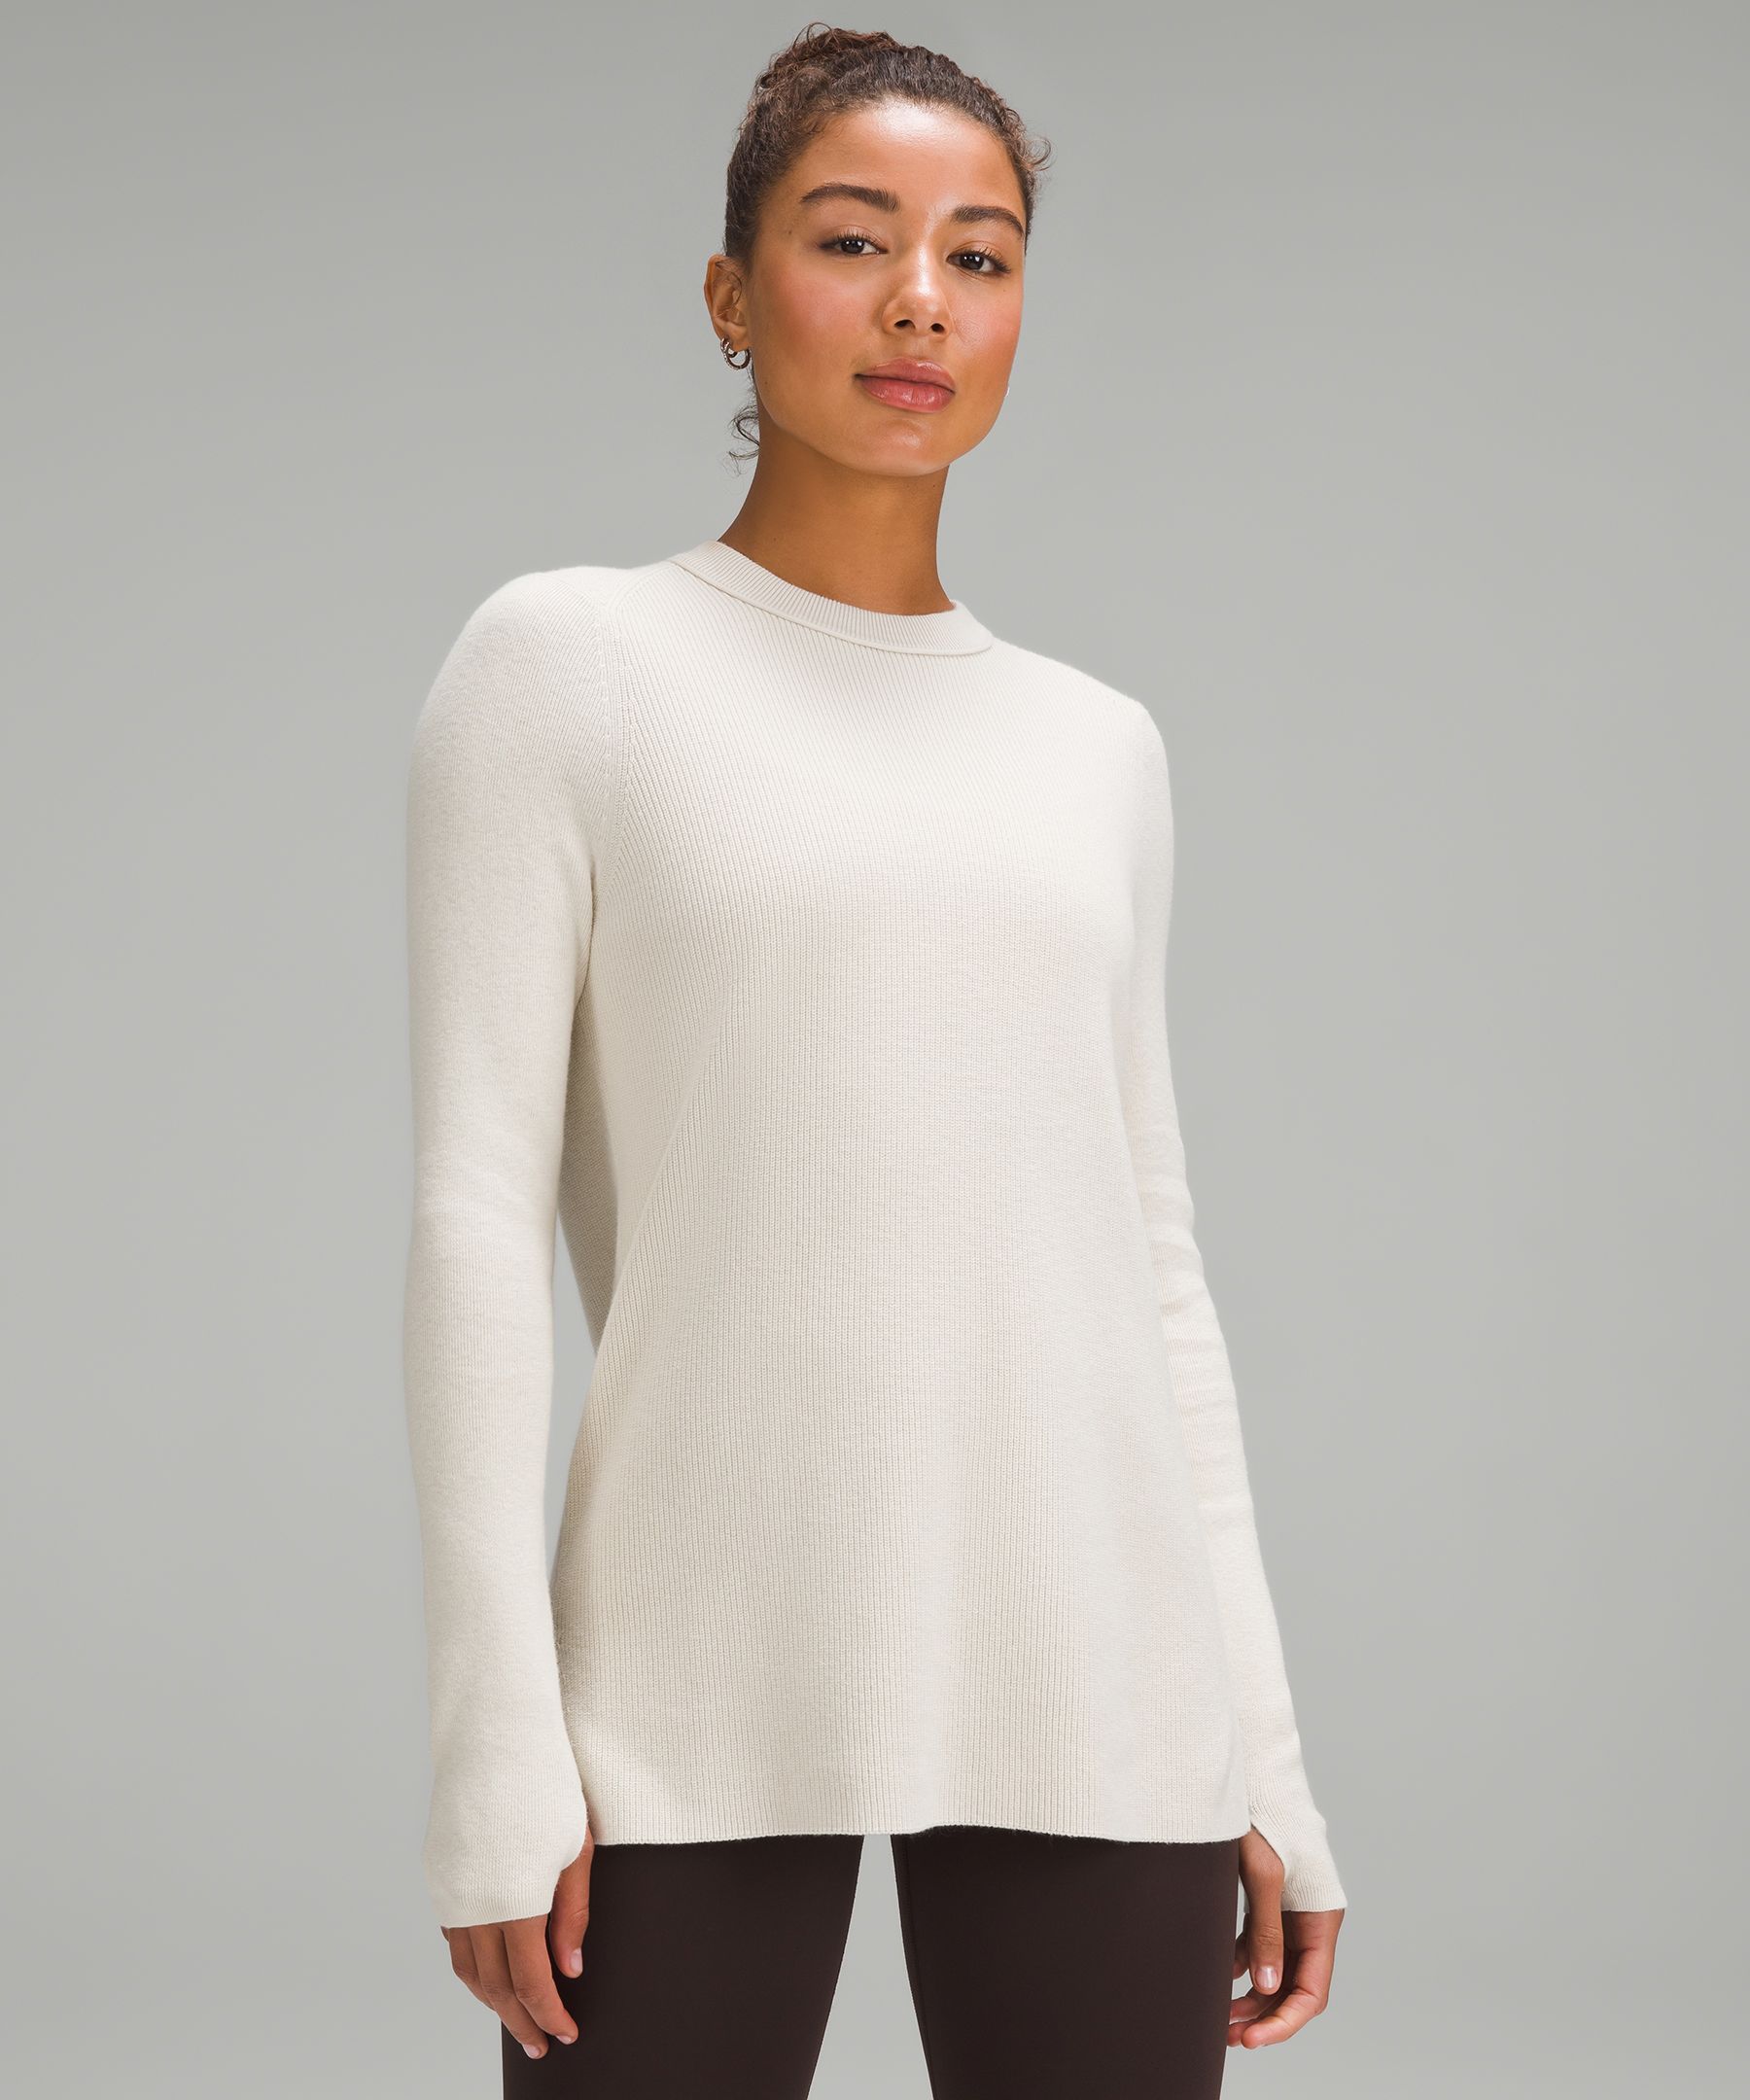 WOMEN'S SMOOTH COTTON RELAXED CREW NECK SWEATER